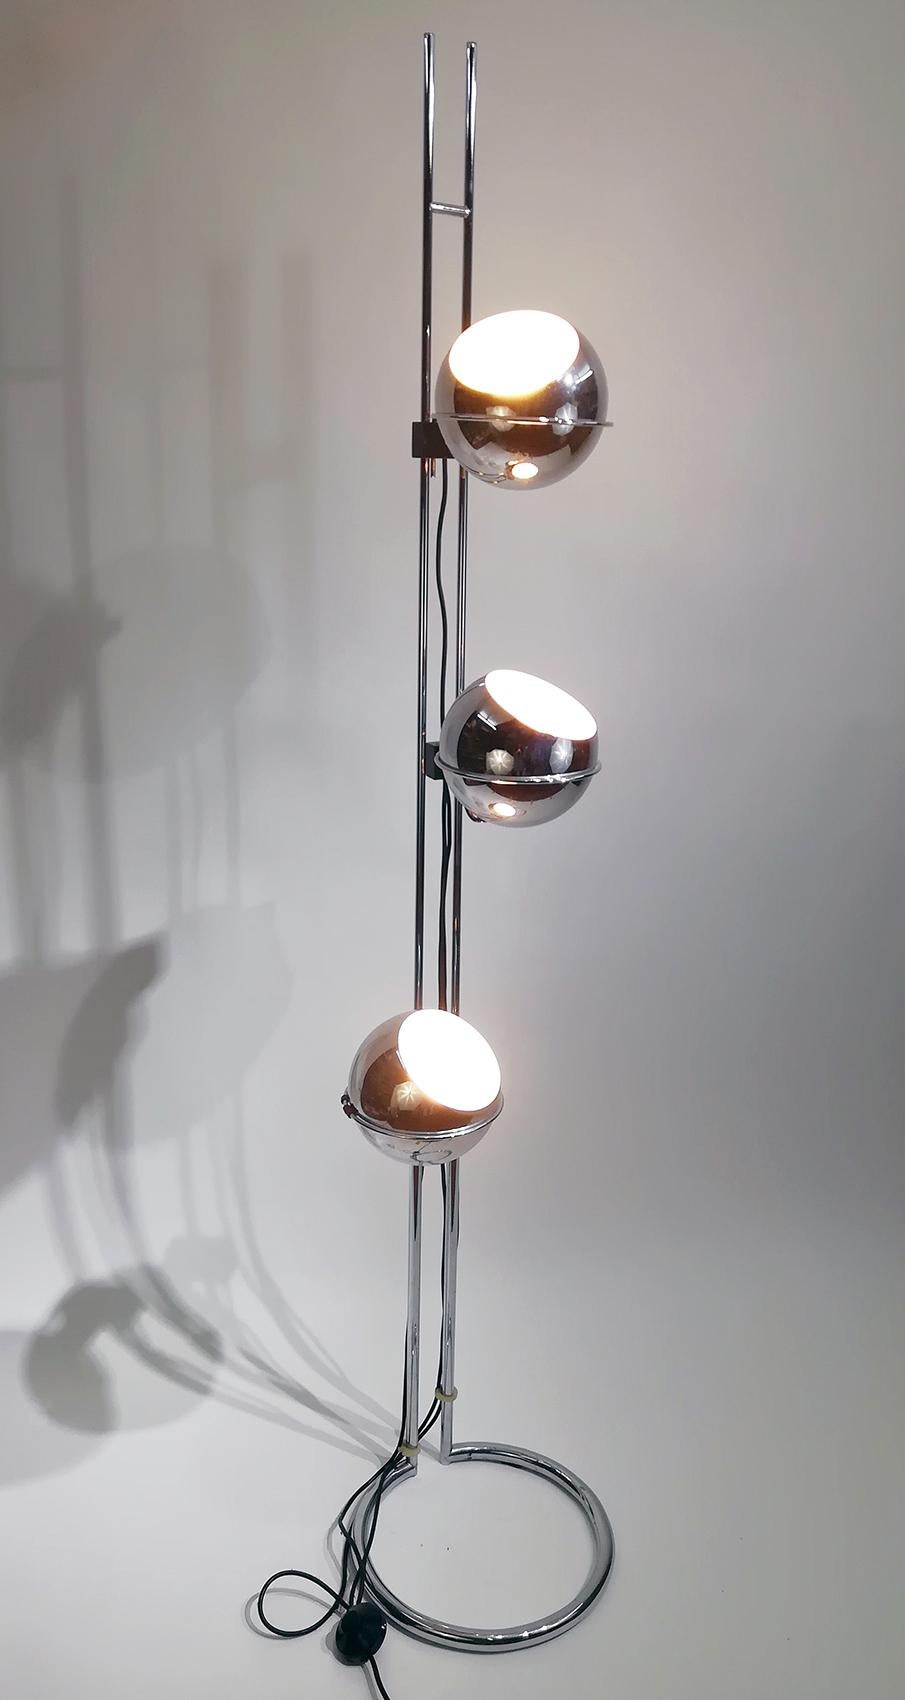 Floor lamp 3 spots by Goffredo Reggiani. Vintage Luminaire published in the years 1970. A Classic of Italian design in chromed metal. Comprising 2 tubular center columns, with 3 eyeball globes that rotates separately in all directions and on